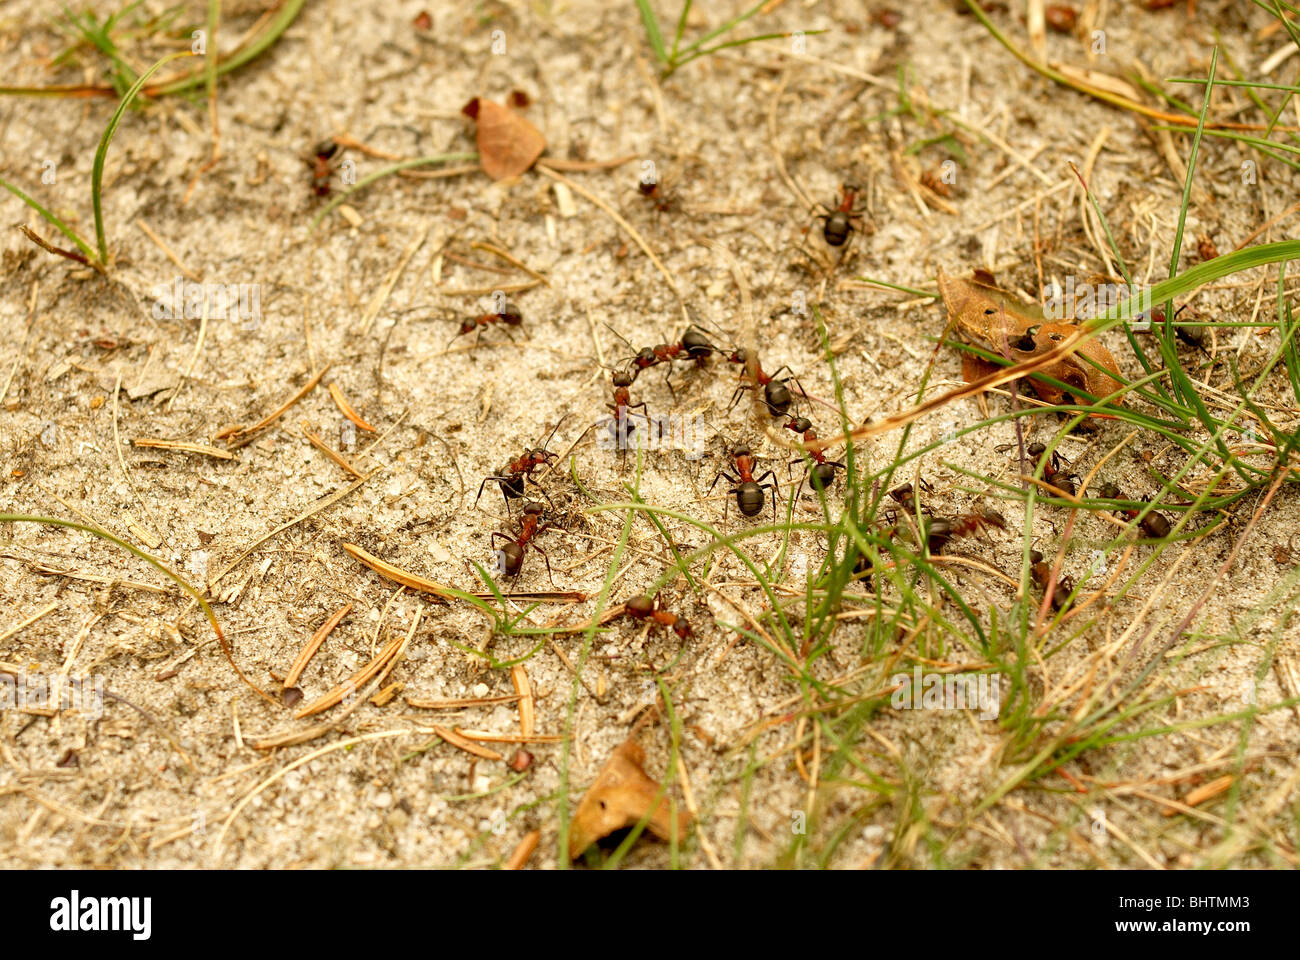 Formica rufa southern wood ant cavallo ant Foto Stock